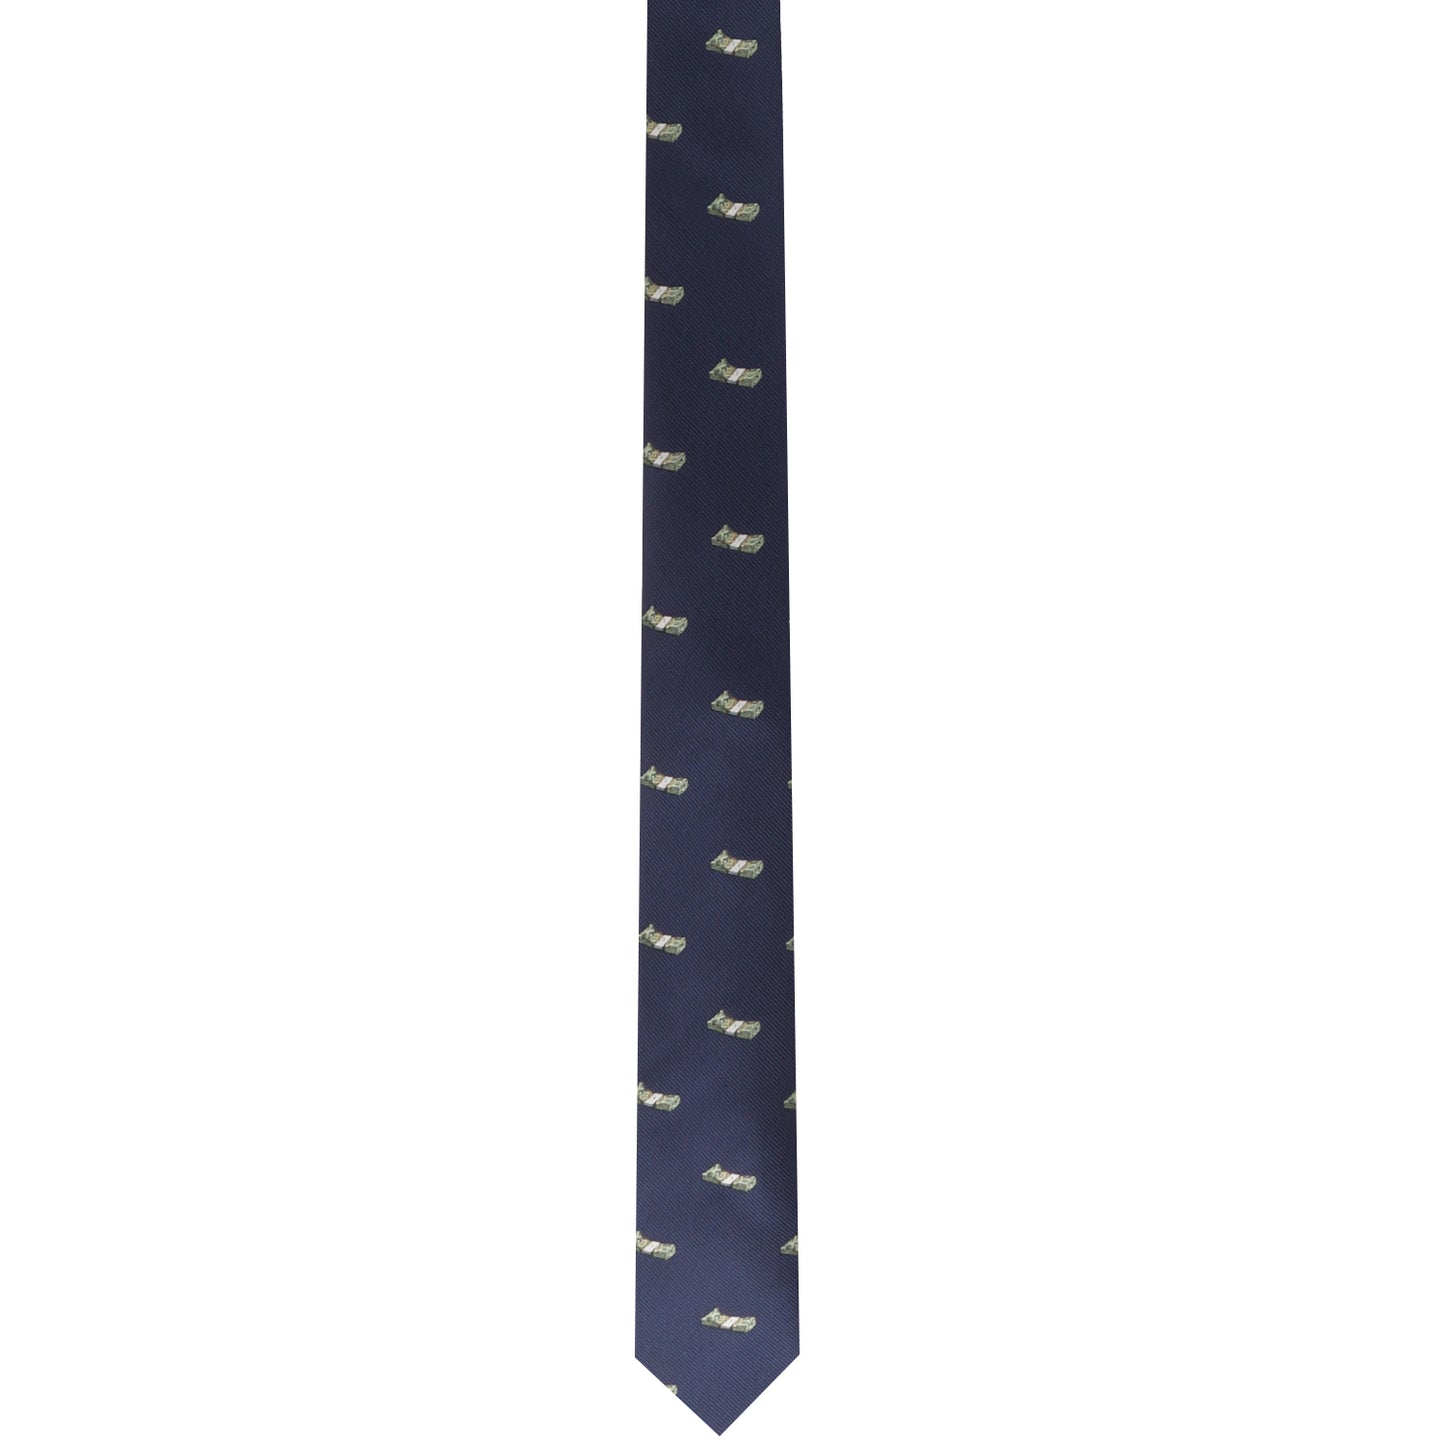 A Cash Skinny Tie with a dog on it.